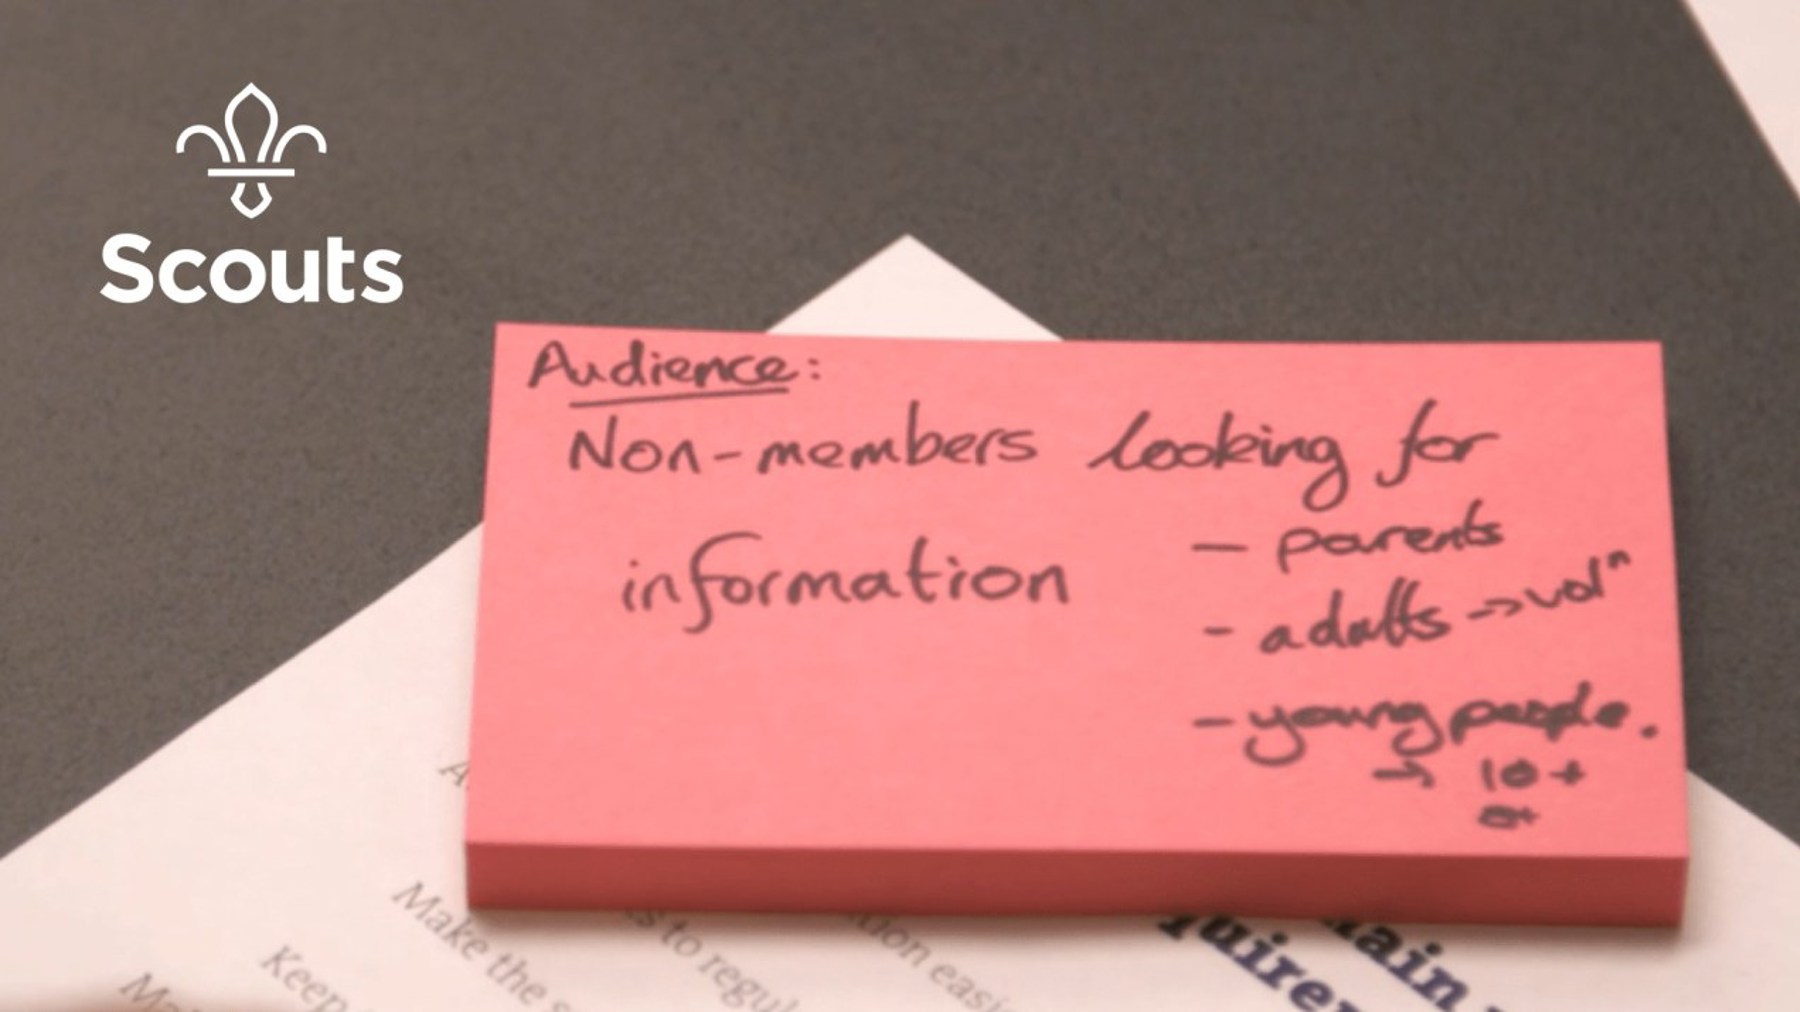 Post it note showing the audience for the website